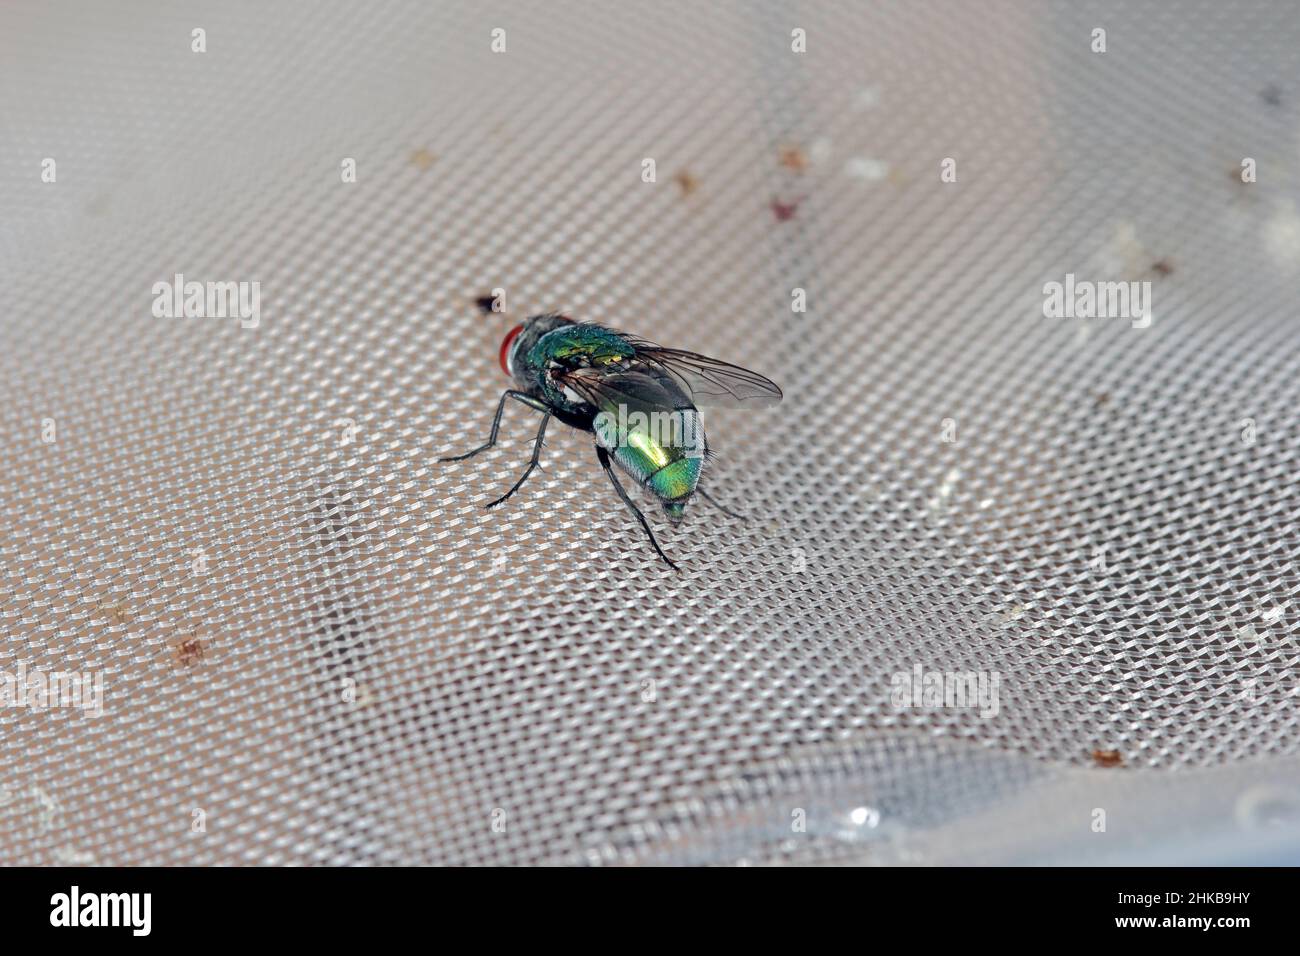 Fly Lucilia caesar common greenbottle blowfly Diptera in close up view while laying eggs. Stock Photo